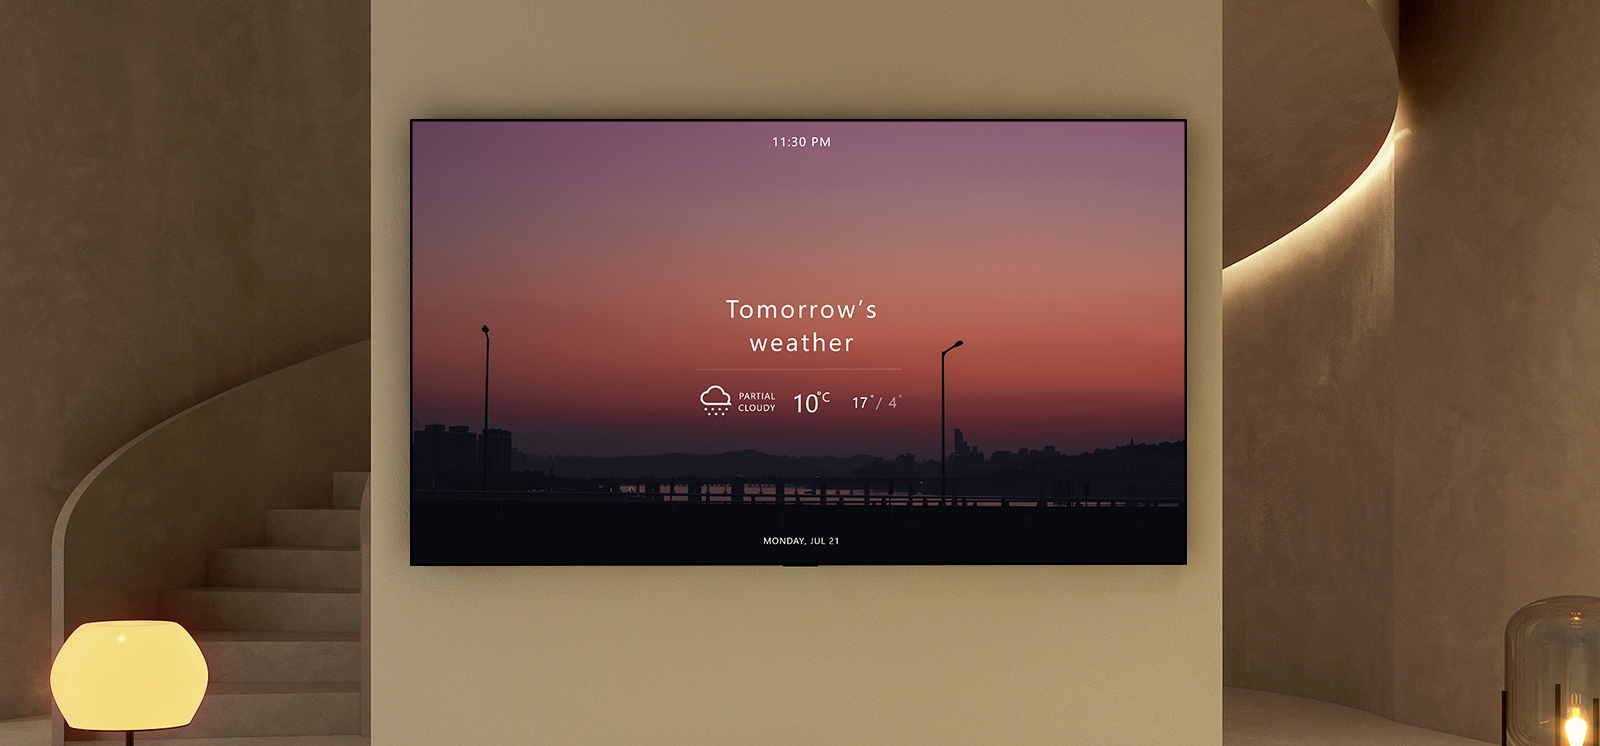 A TV screen shows a Tomorrow’s weather.